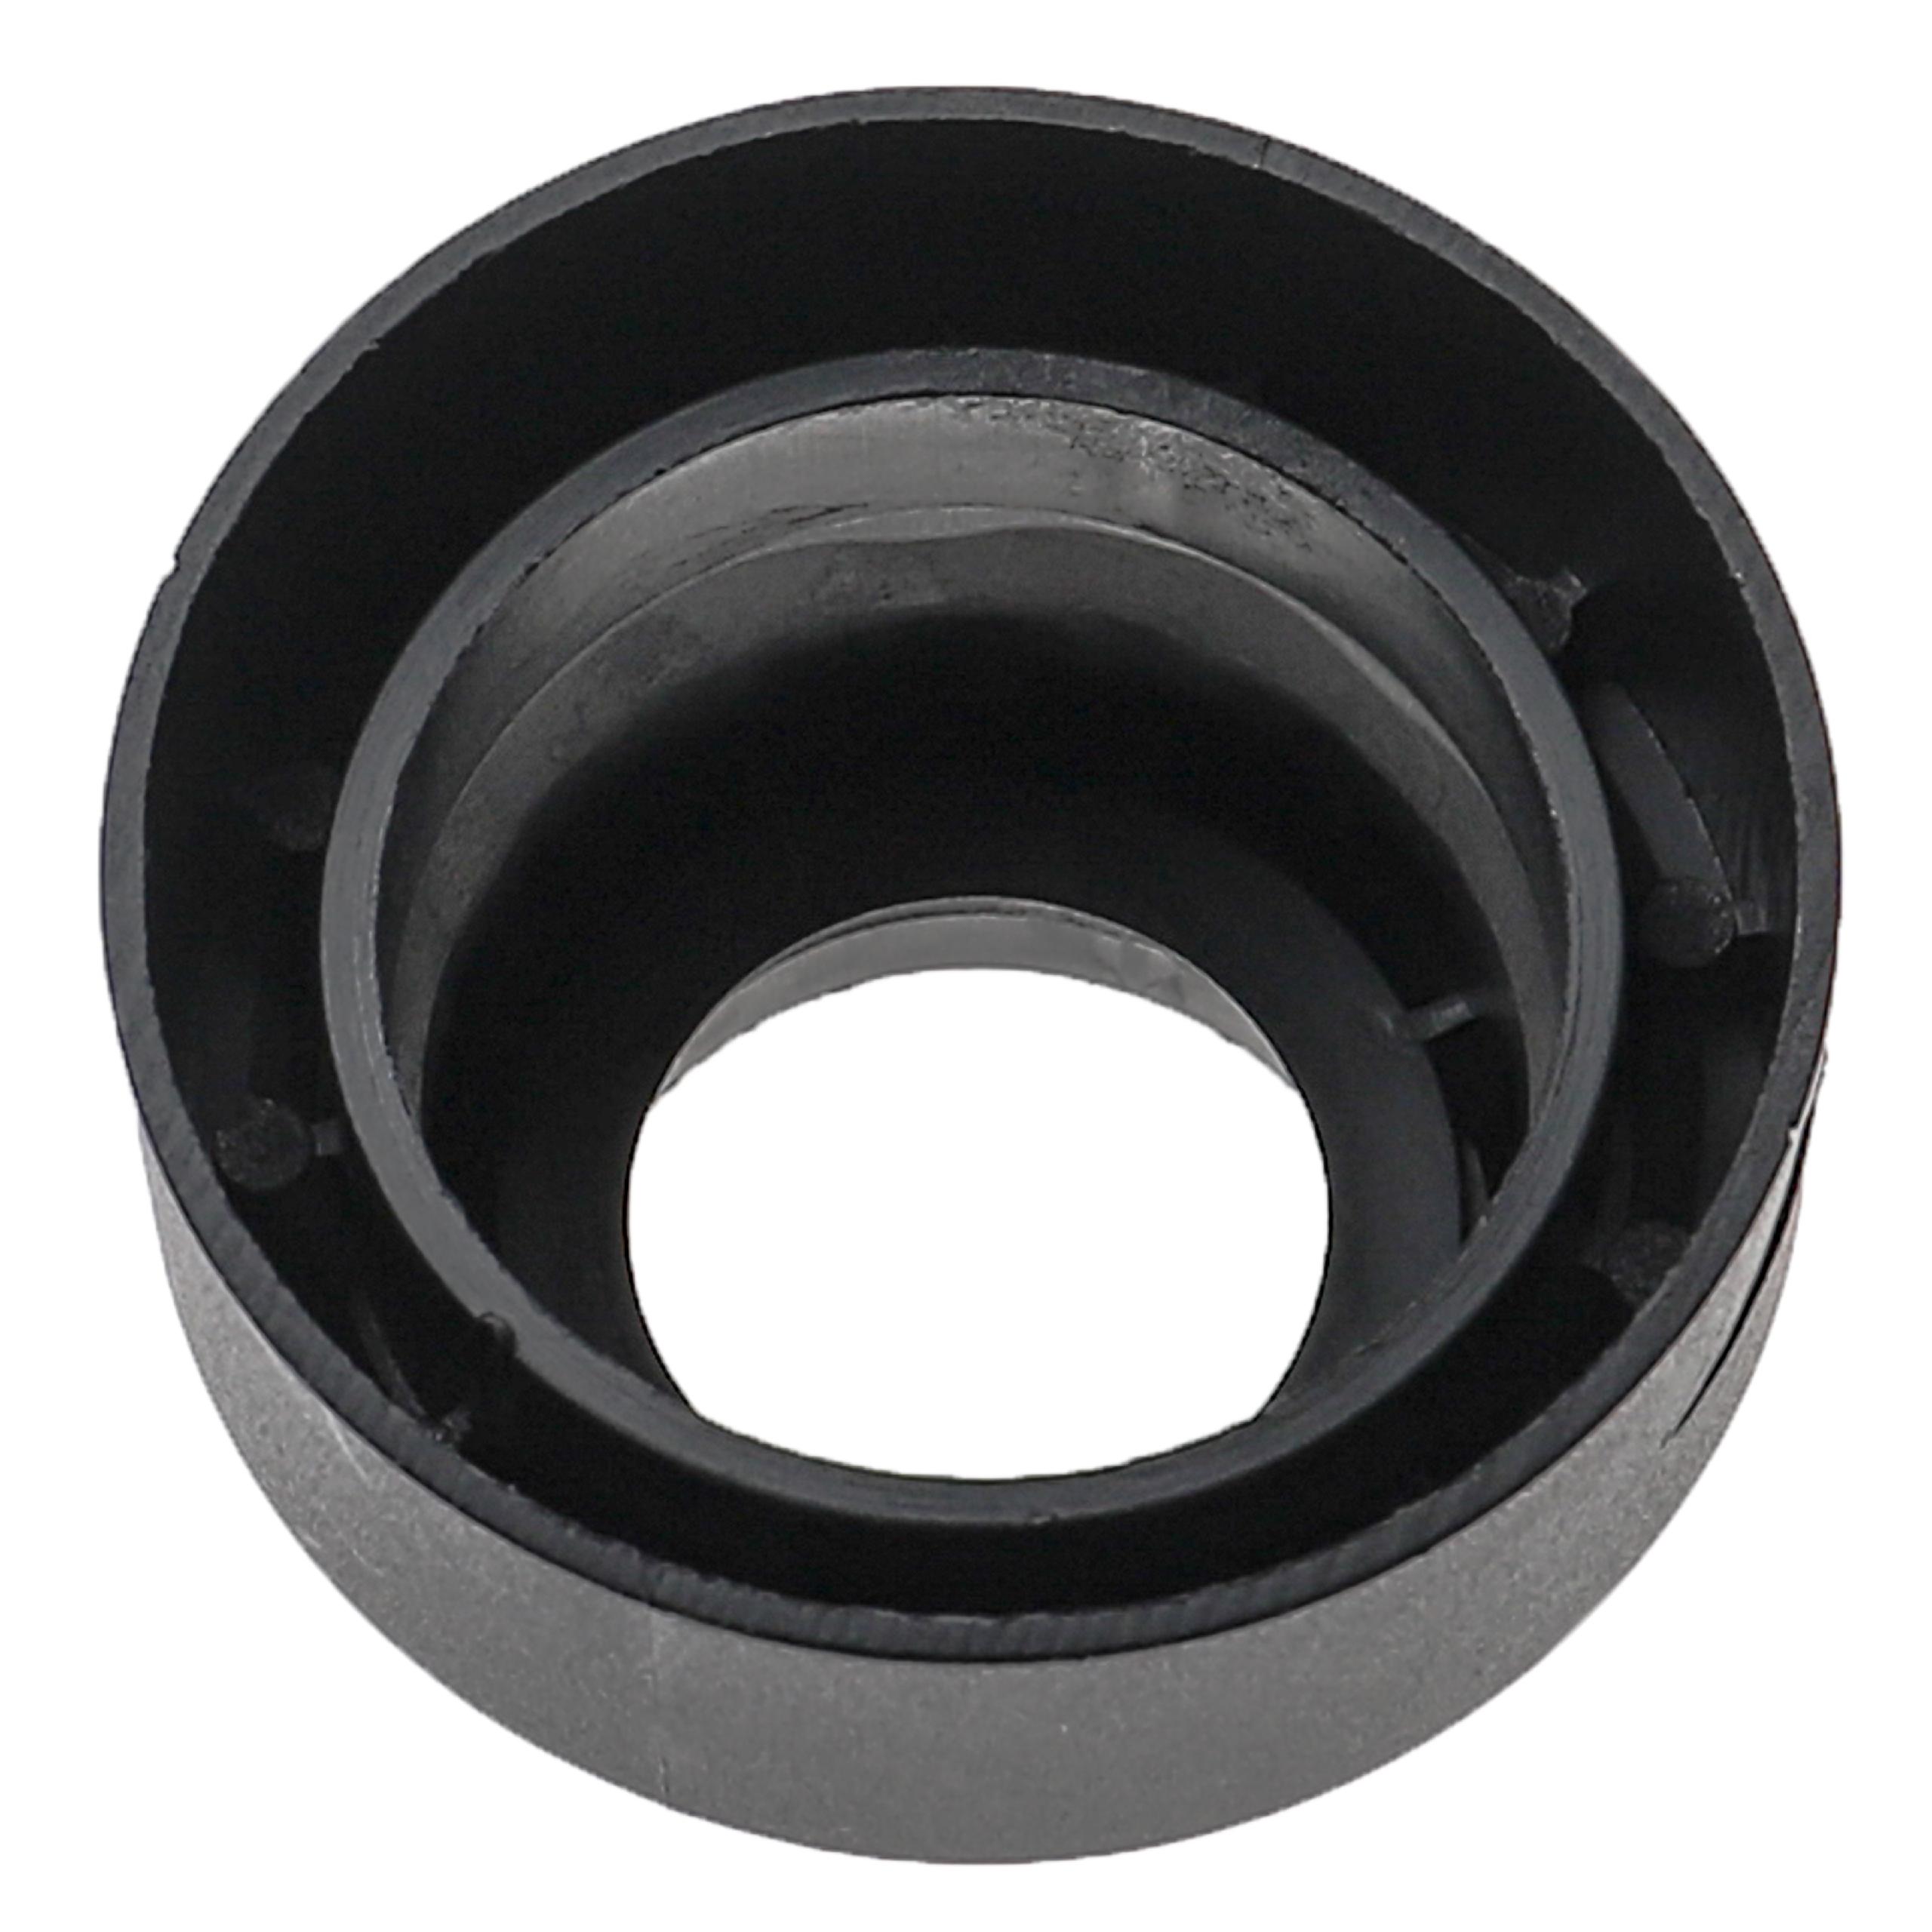 Drill Chuck Guard as Replacement for Bosch 1 619 P02 182 suitable for Bosch Hammer Drill, Power Drill